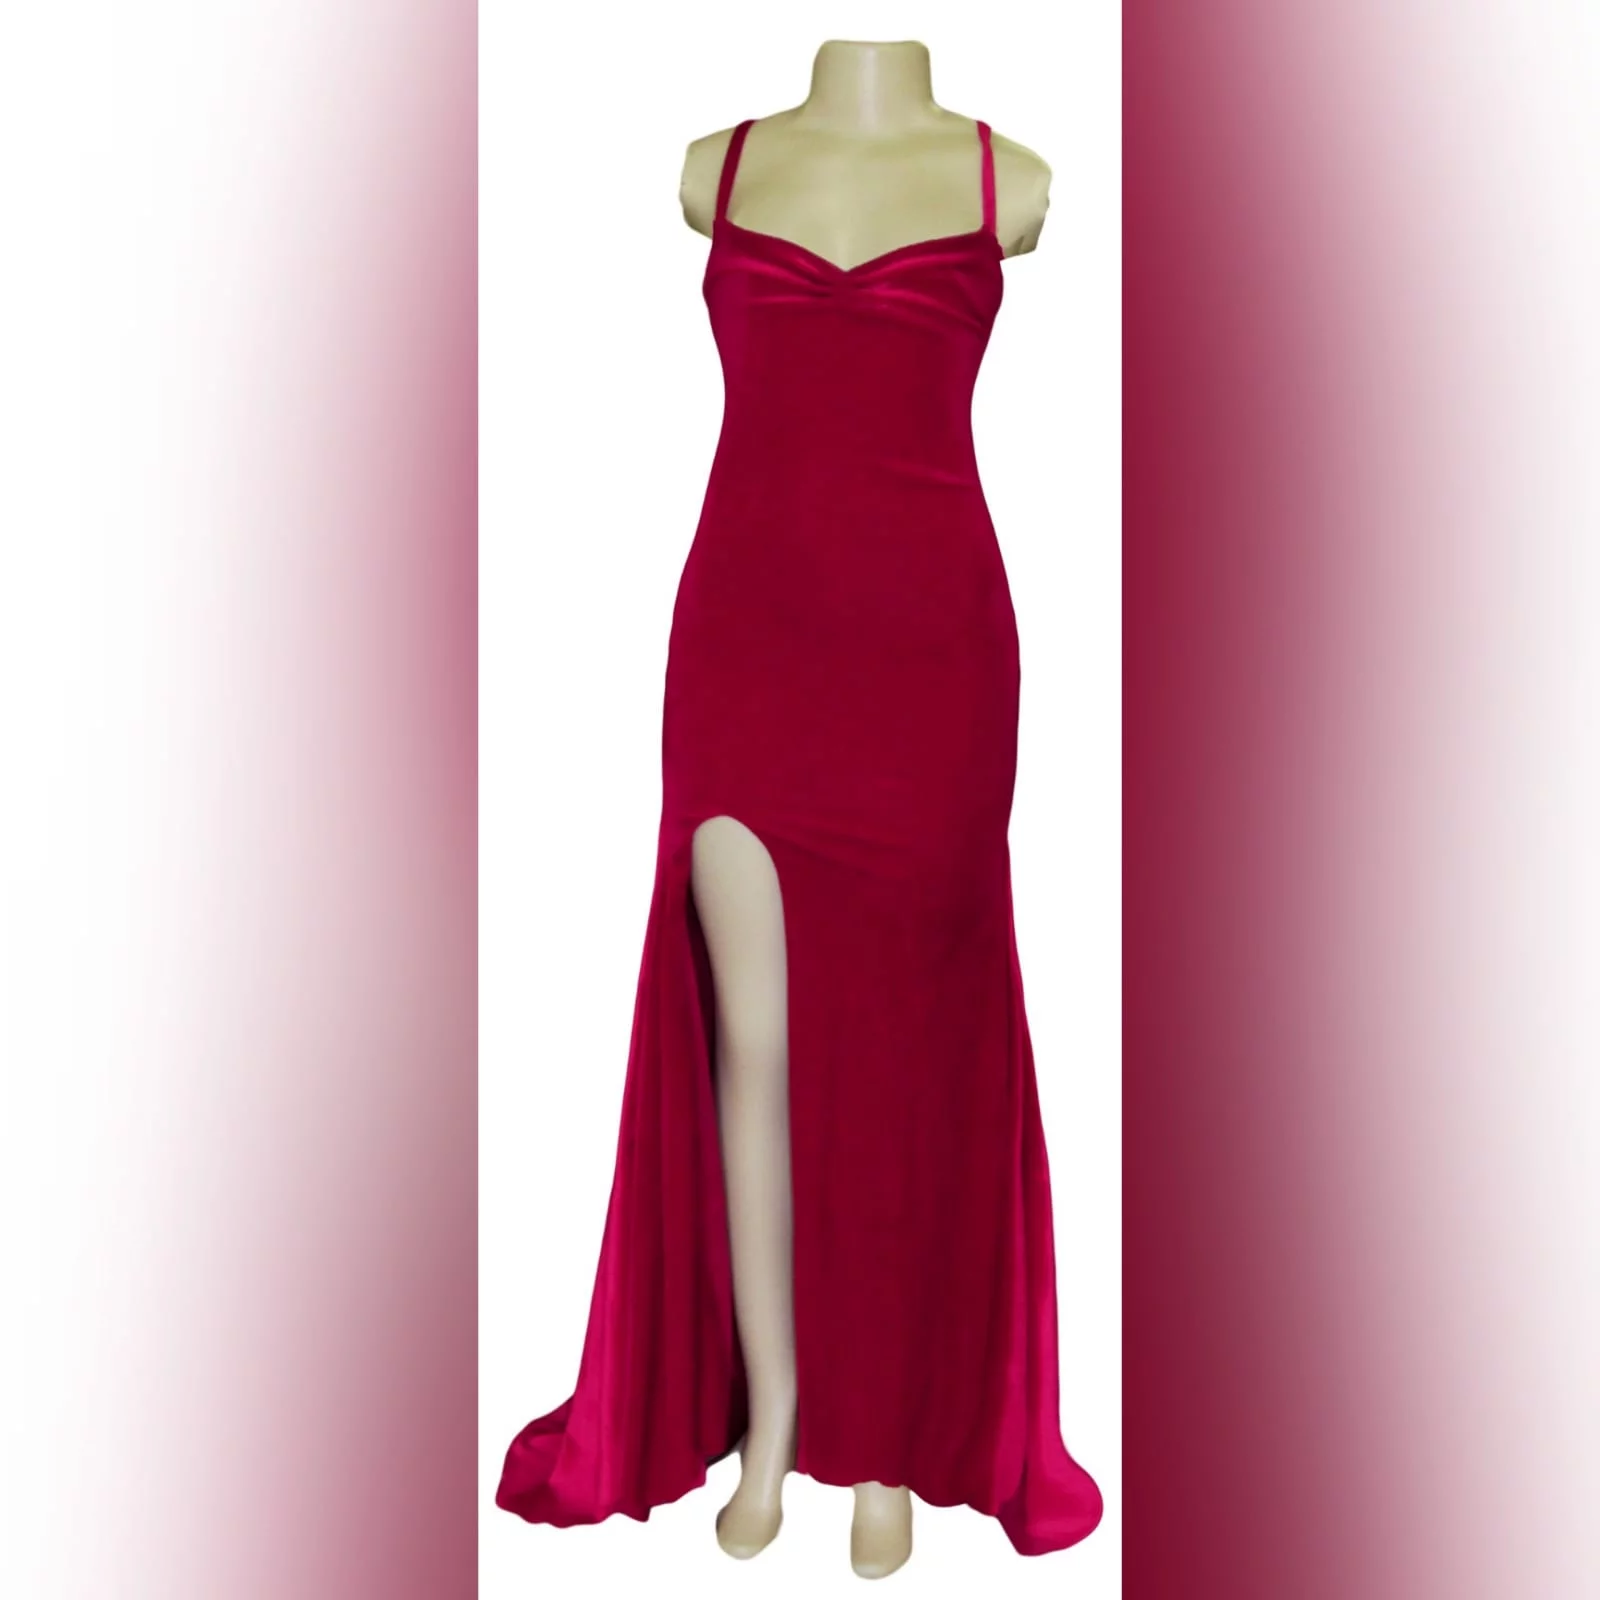 Red velvet long fitted evening party dress 4 red velvet long fitted evening party dress. This design has a laceup back which adds a stunning look to it and also helps adjust the dress fit. It has a high slit and a train for a dramatic effect.